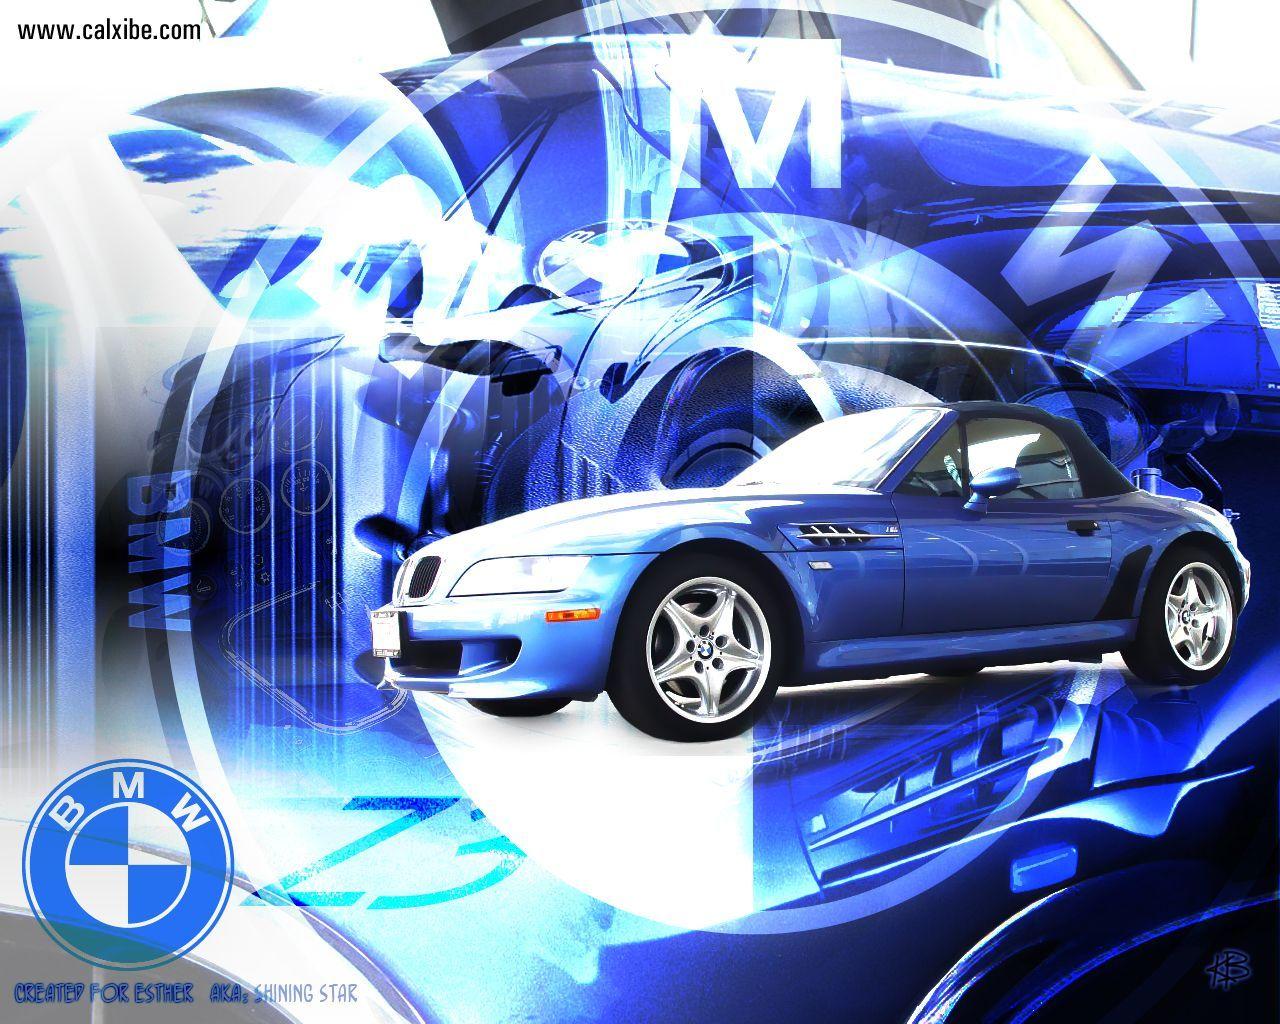 Cars: BMW Z picture nr. 9941